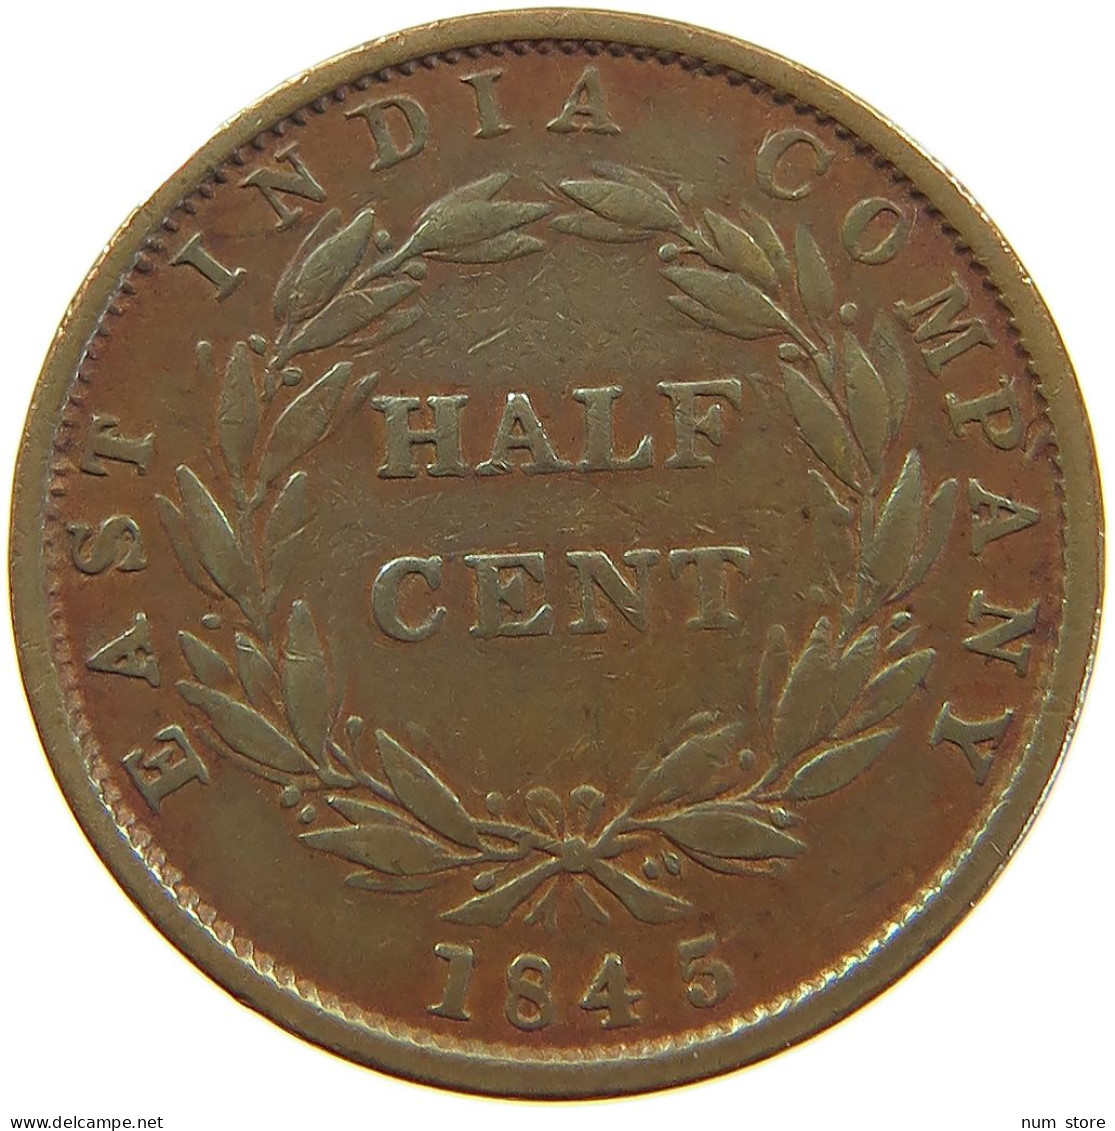 STRAITS SETTLEMENTS 1/2 CENT 1845 VICTORIA 1837-1901 EAST INDIA COMPANY #MA 068542 - Colonies